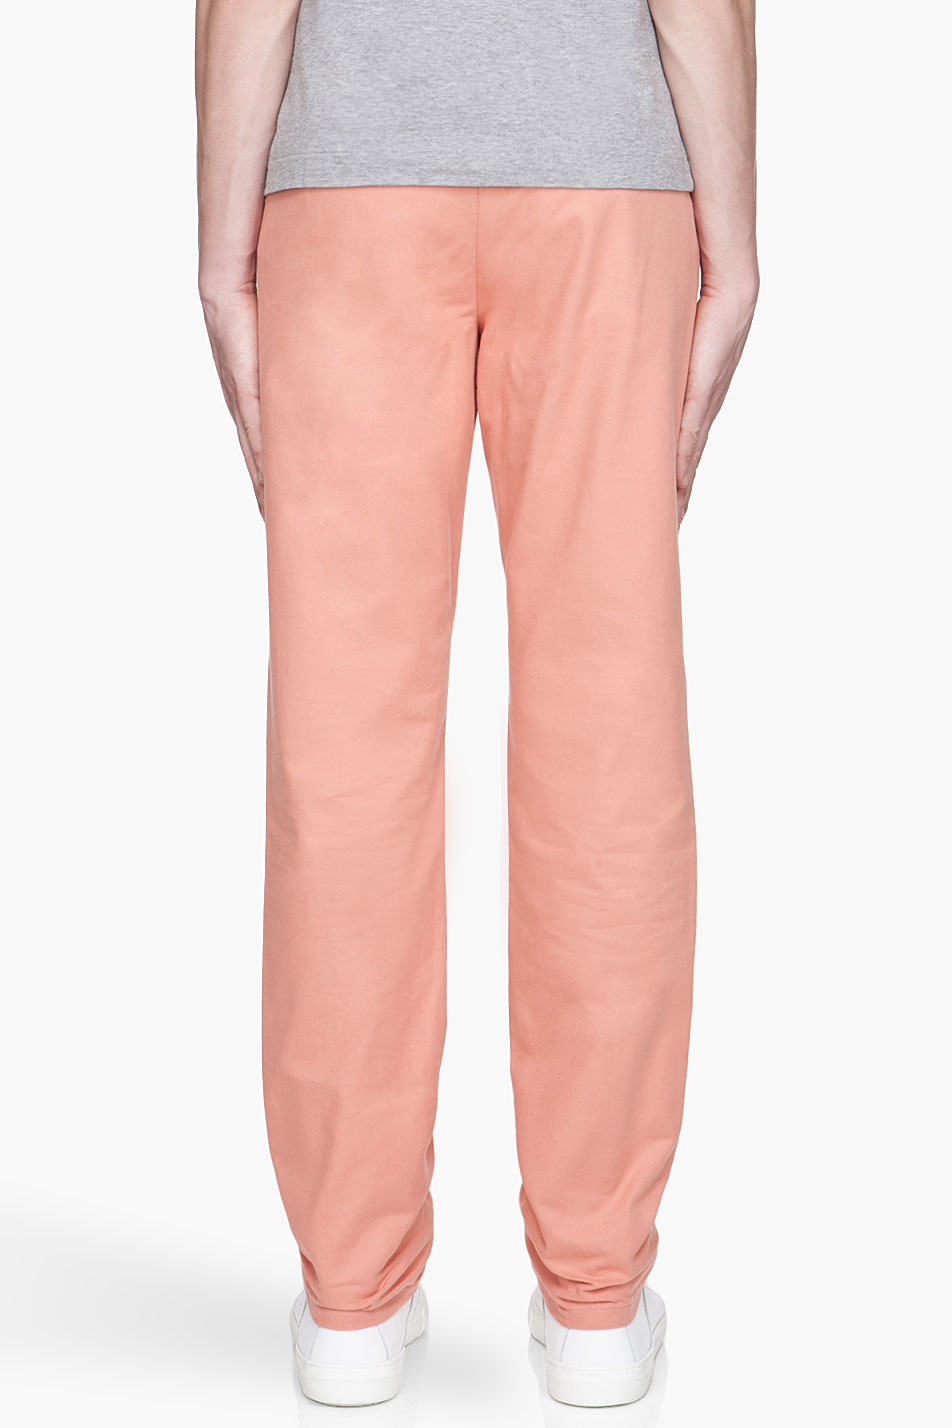 A.P.C. Pastel Peach Classic Gabardine Sport Trousers in Pink for Men - Lyst